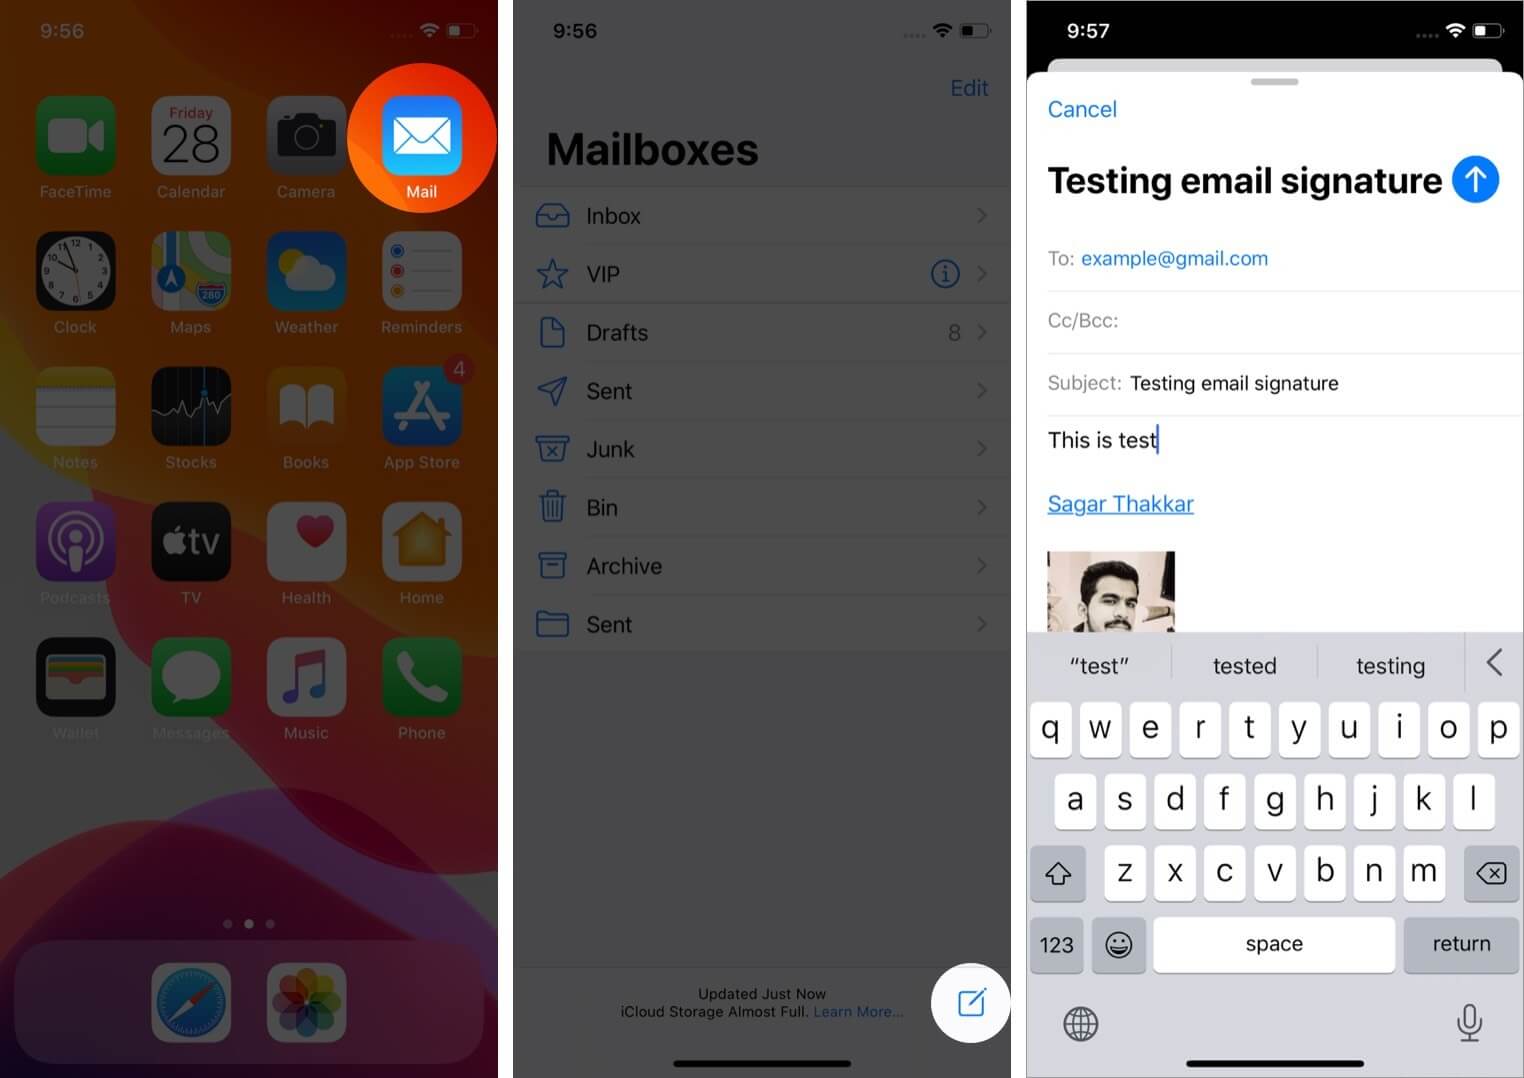 open mail app and tap on compose to check email signature on iphone